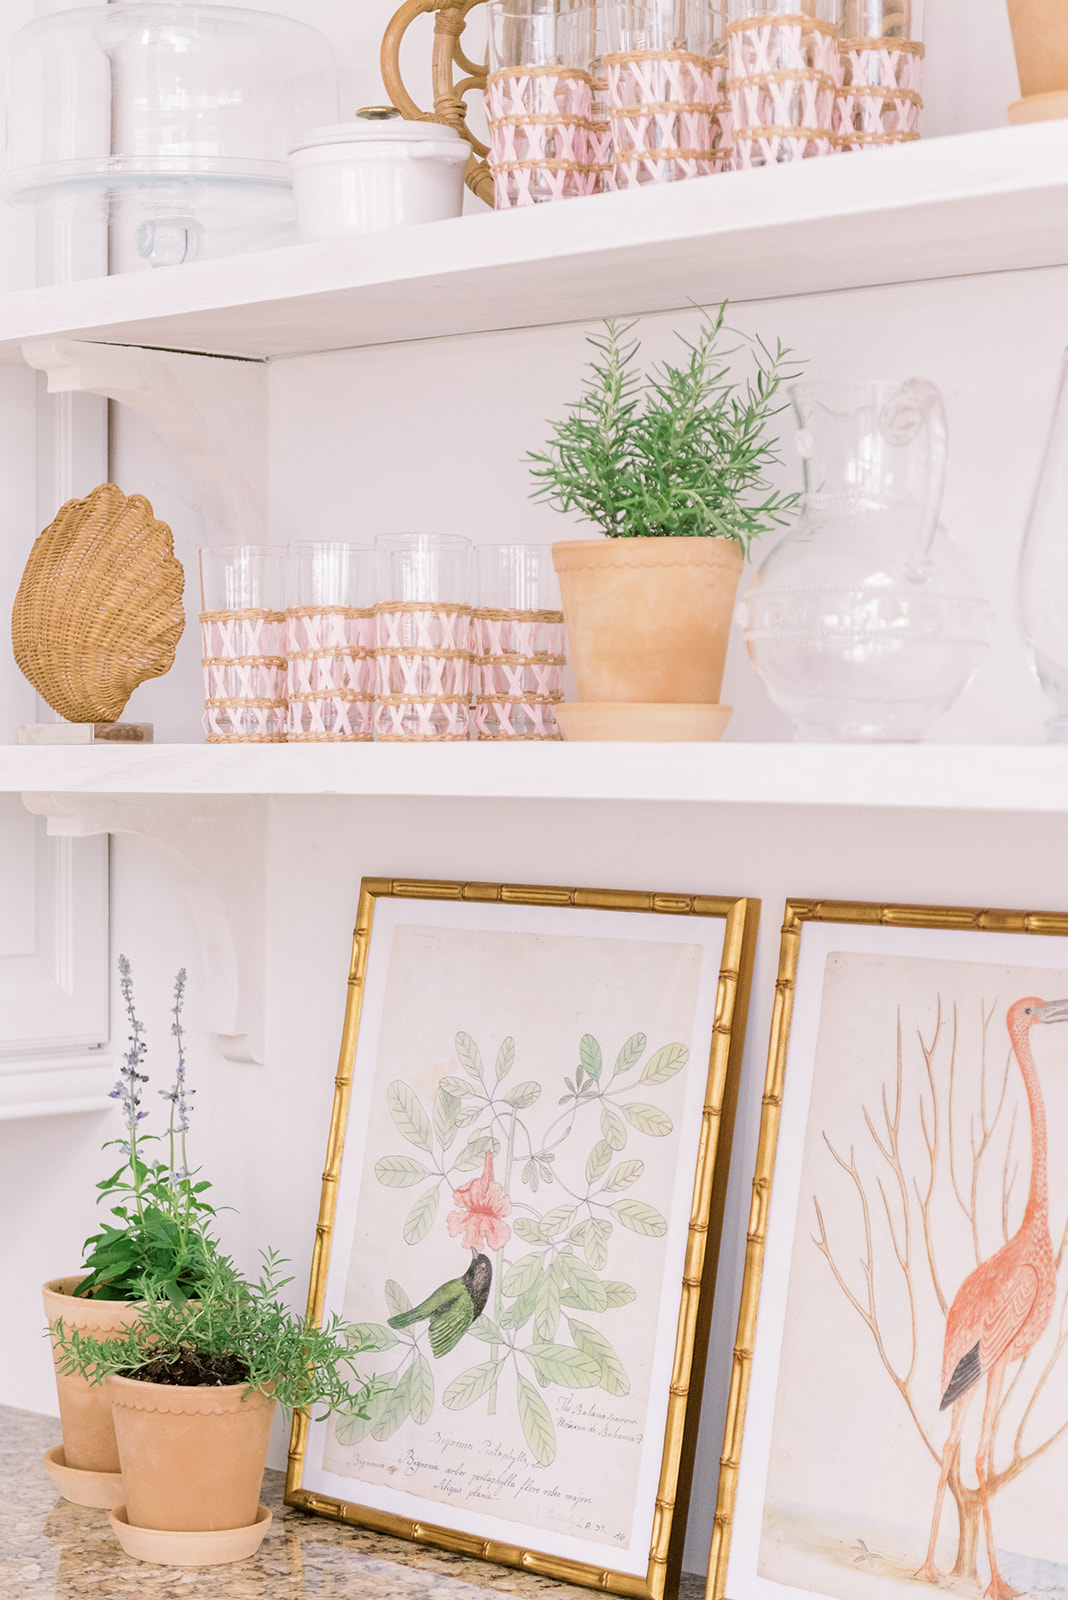 Home: Cottage Shelf Style with Palm Beach Lately